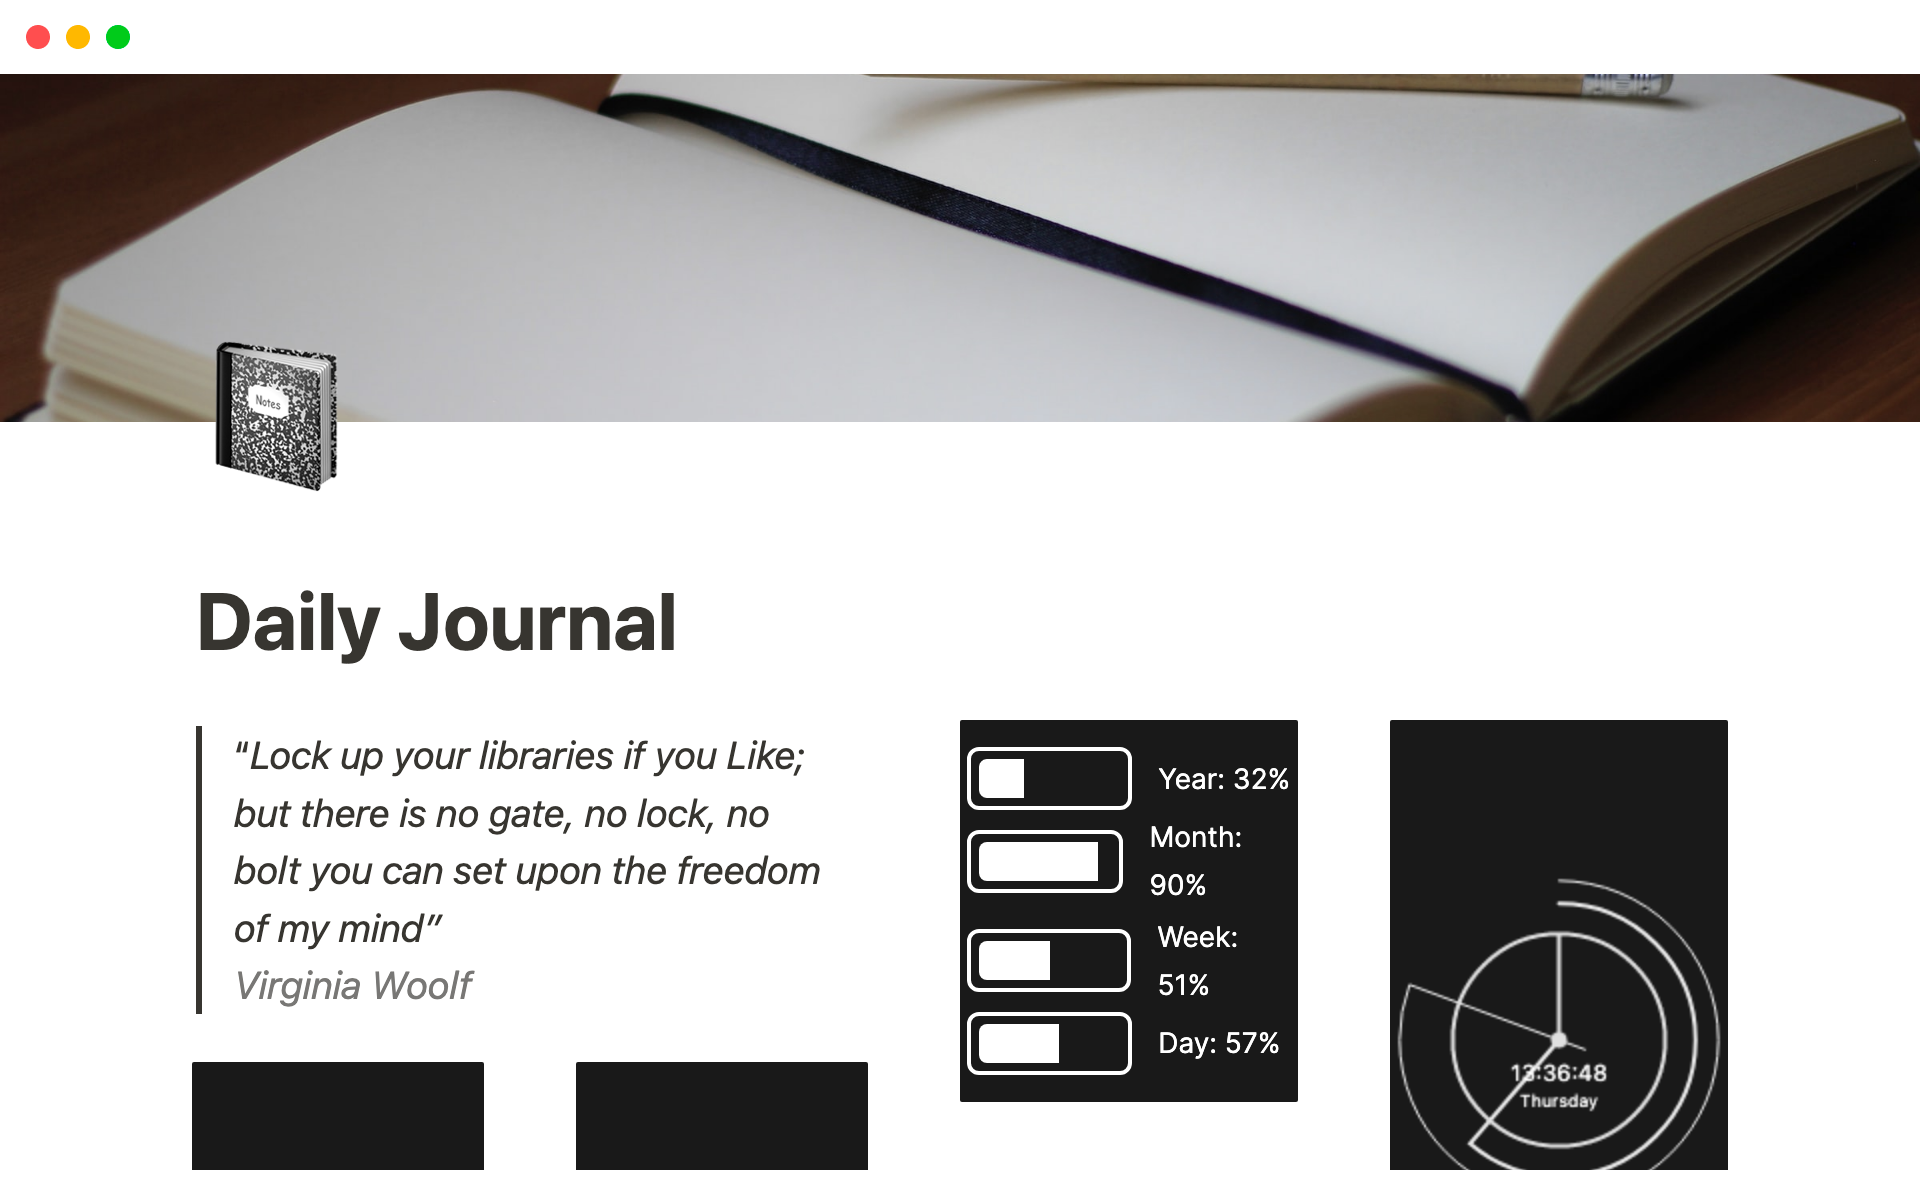 The personal diary template for Notion helps track daily activities, goals, and progress with customizable pages for scheduling, to-do lists, gratitude journaling, habit tracking, and progress monitoring. It has an elegant and user-friendly design.